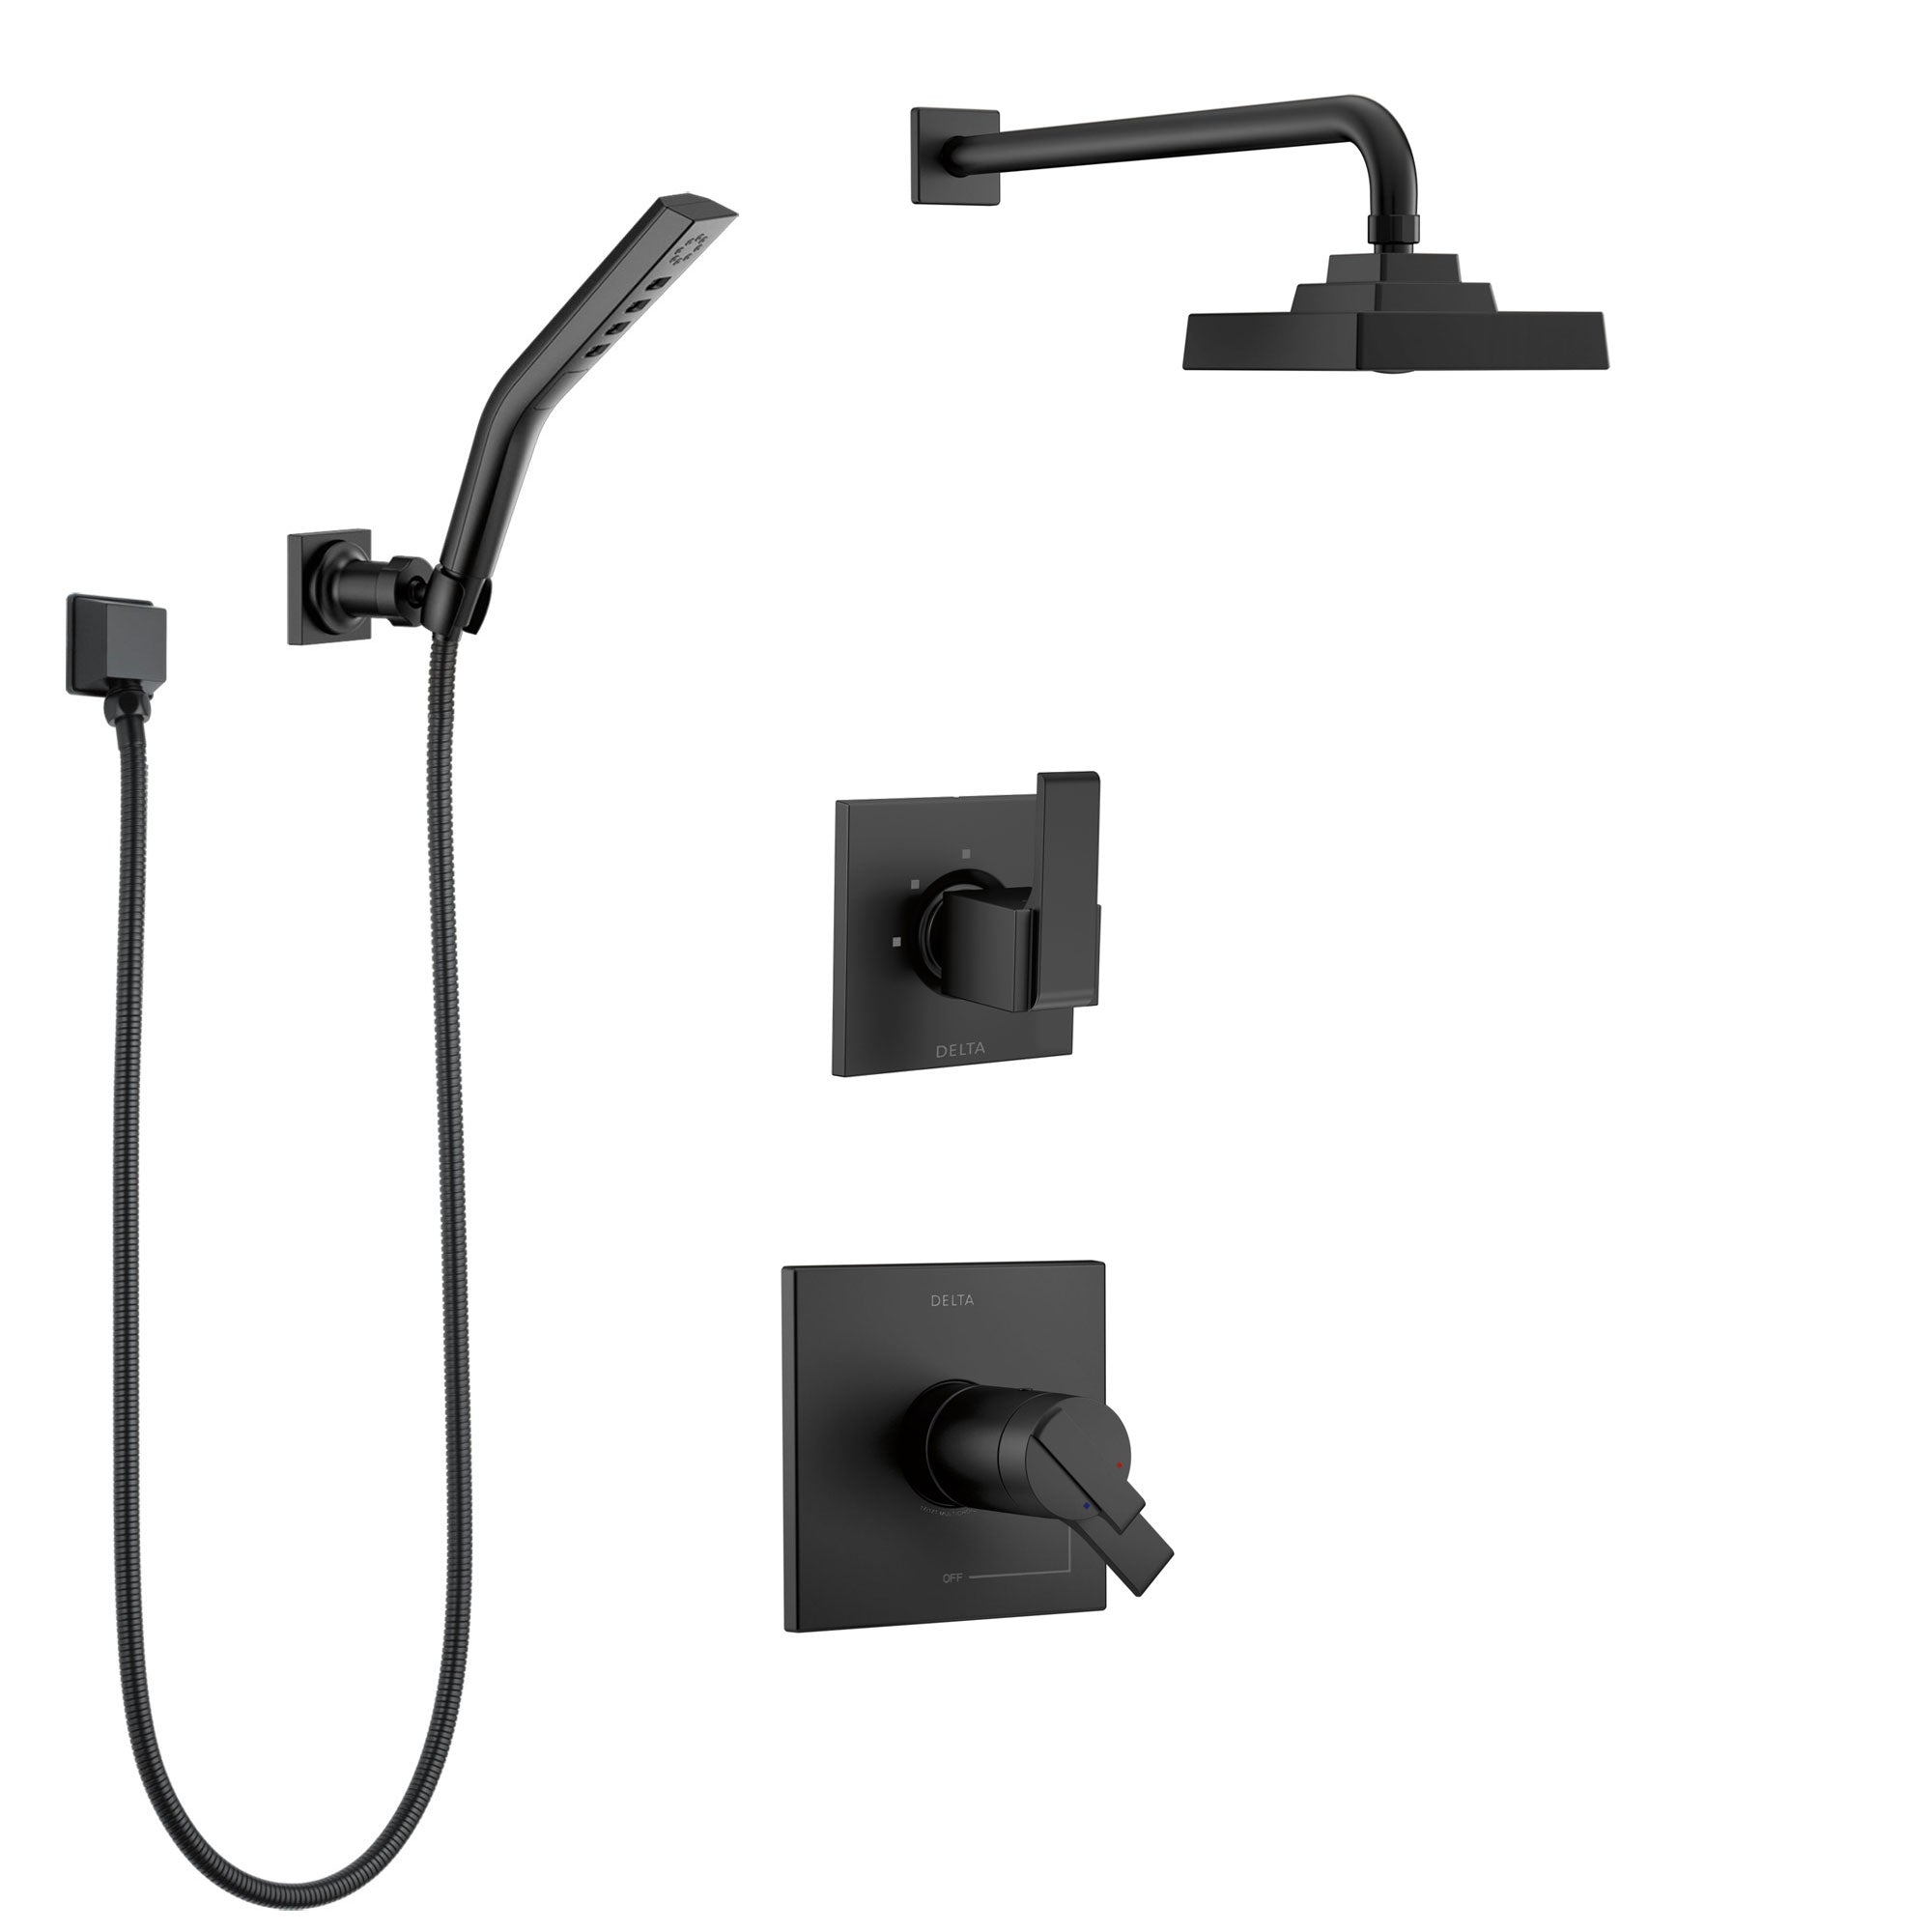 Delta Ara Matte Black Finish Thermostatic 17T Shower System with Diverter, Wall Mount Showerhead, and Hand Shower with Bracket SS17T2673BL3